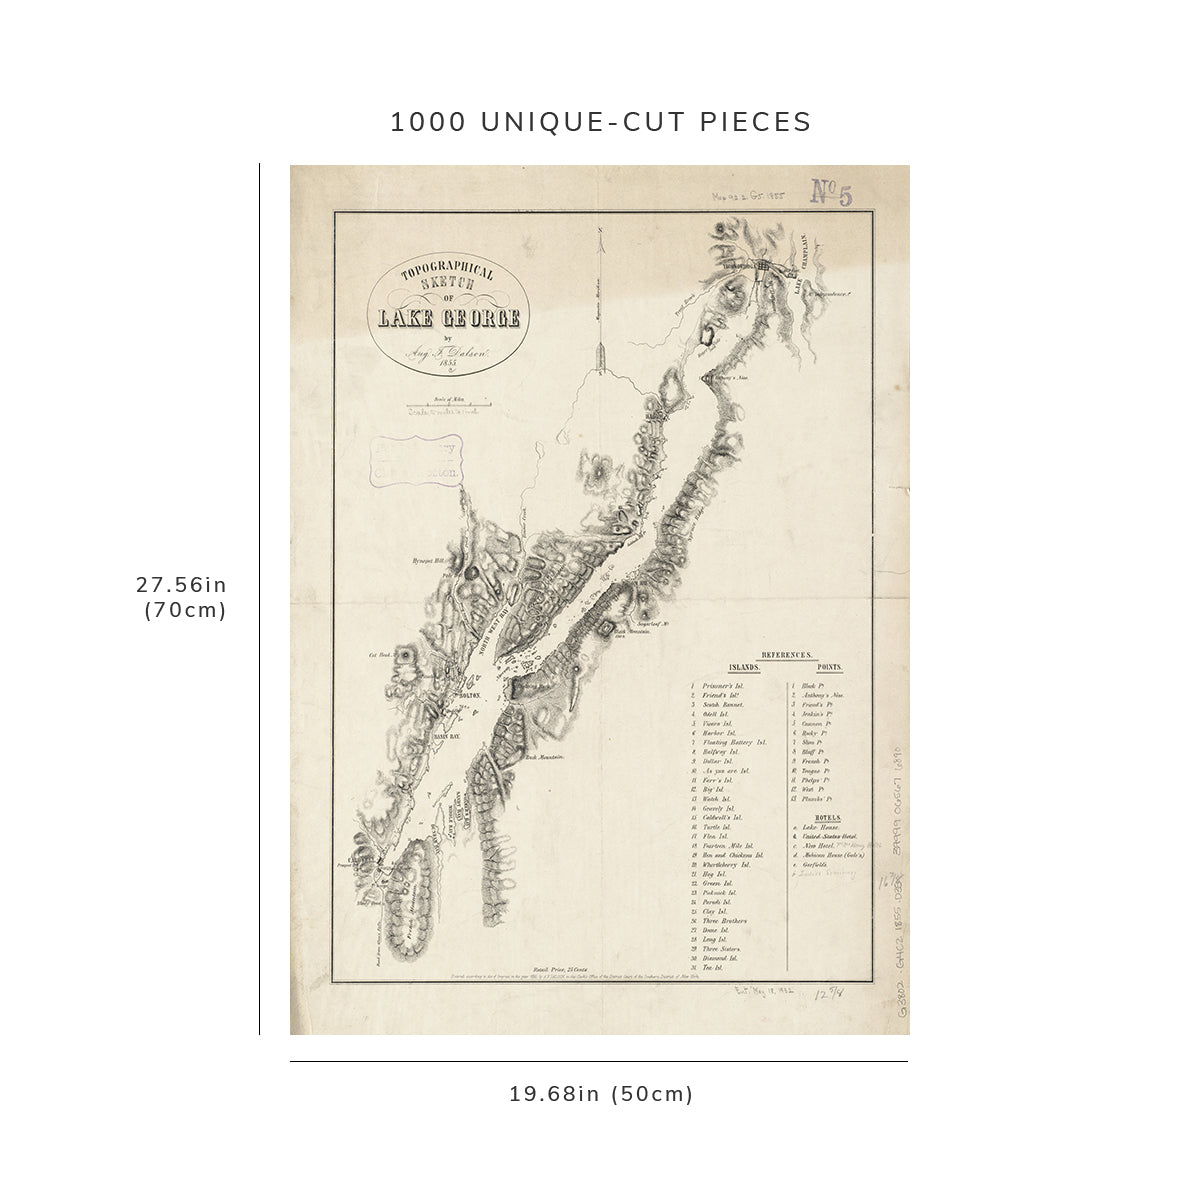 1000 Piece Jigsaw Puzzle: 1855 Map New York | George, Lake | Topographical sketch